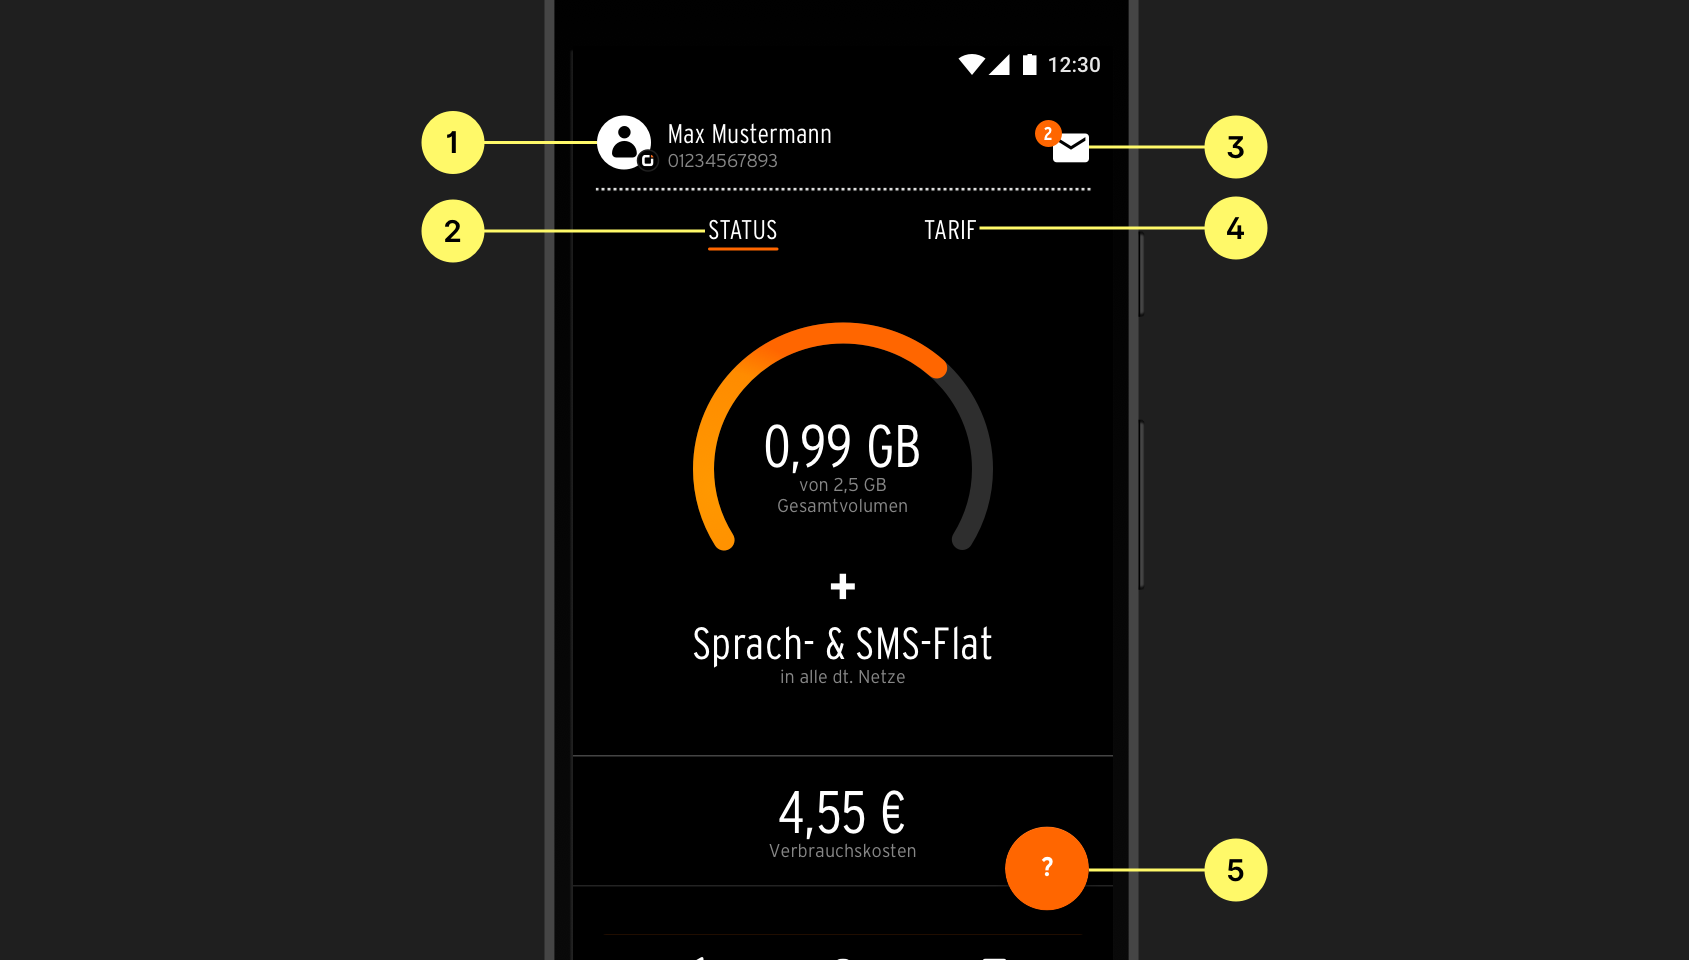 A smartphone with the old otelo app navigation. The access to all main app areas is highlighted by numbers.